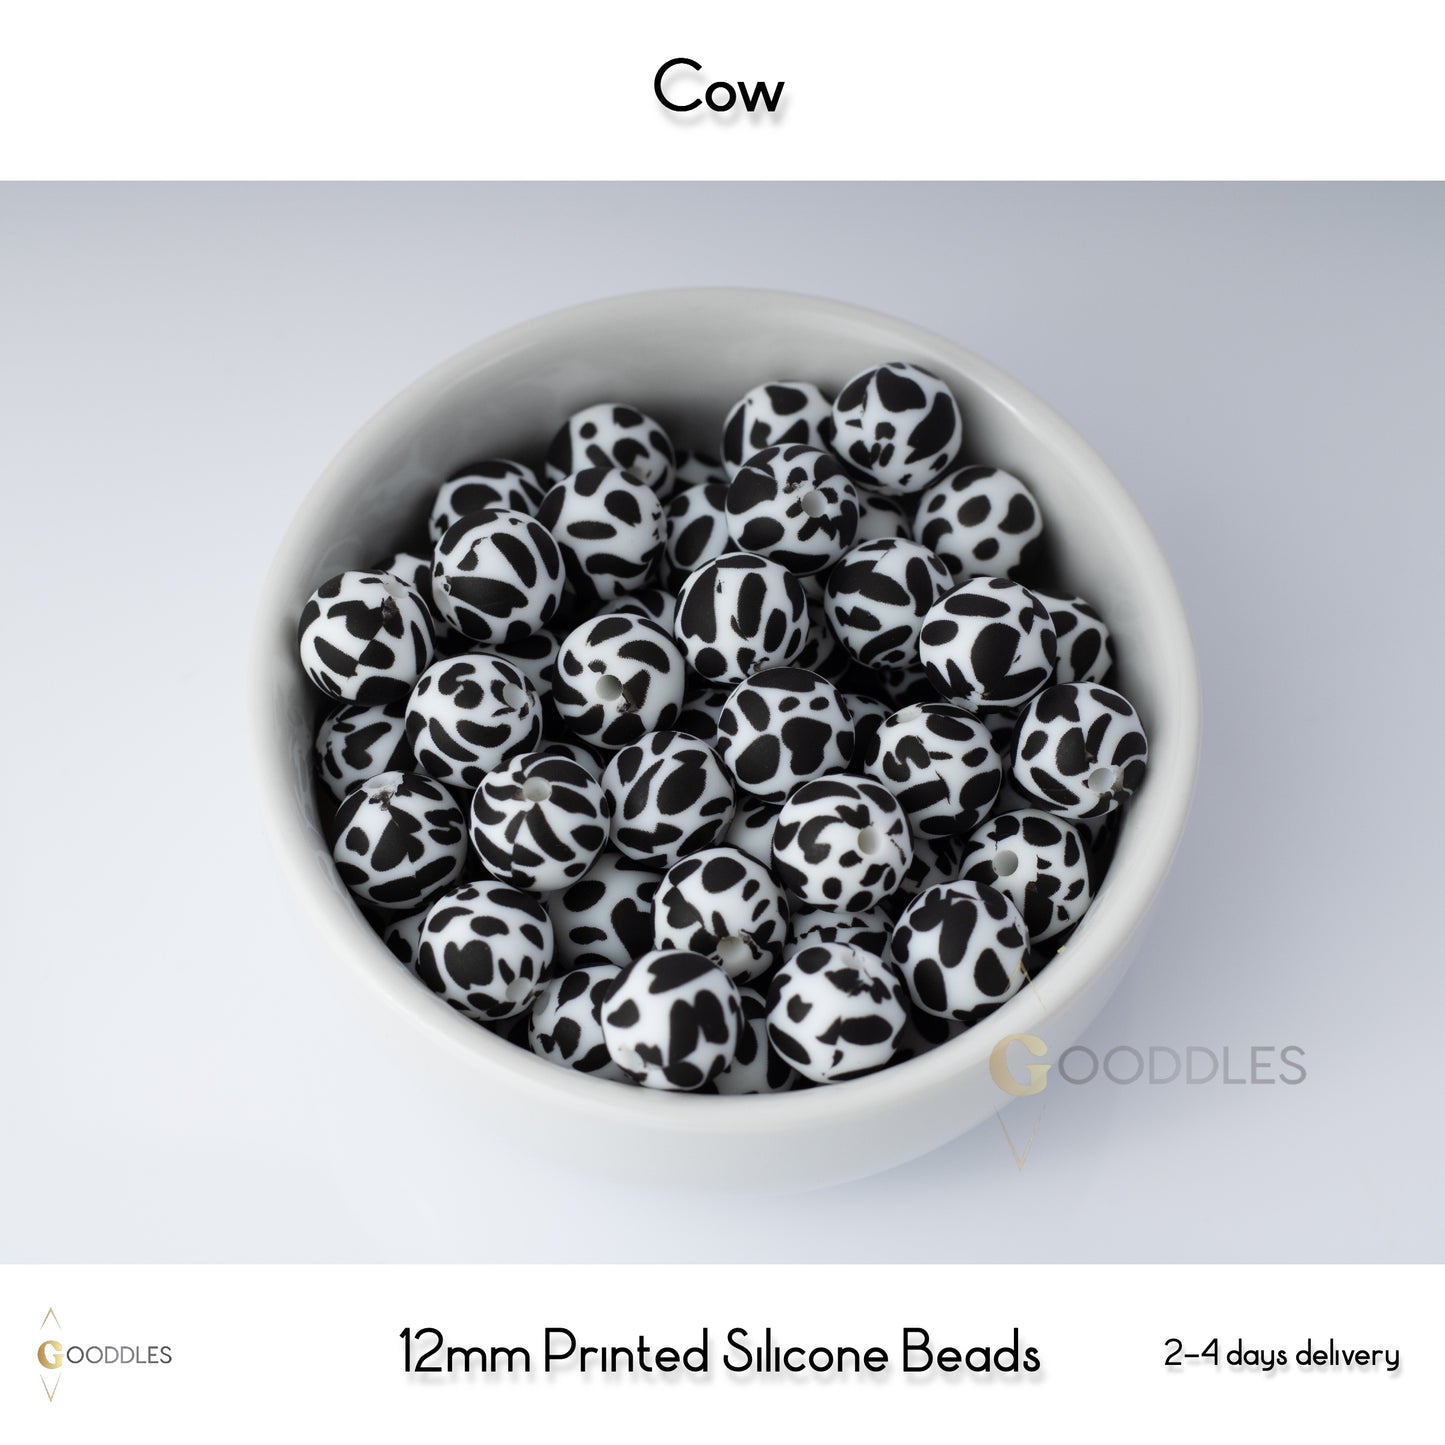 5pcs, Cow Silicone Beads Printed Round Silicone Beads